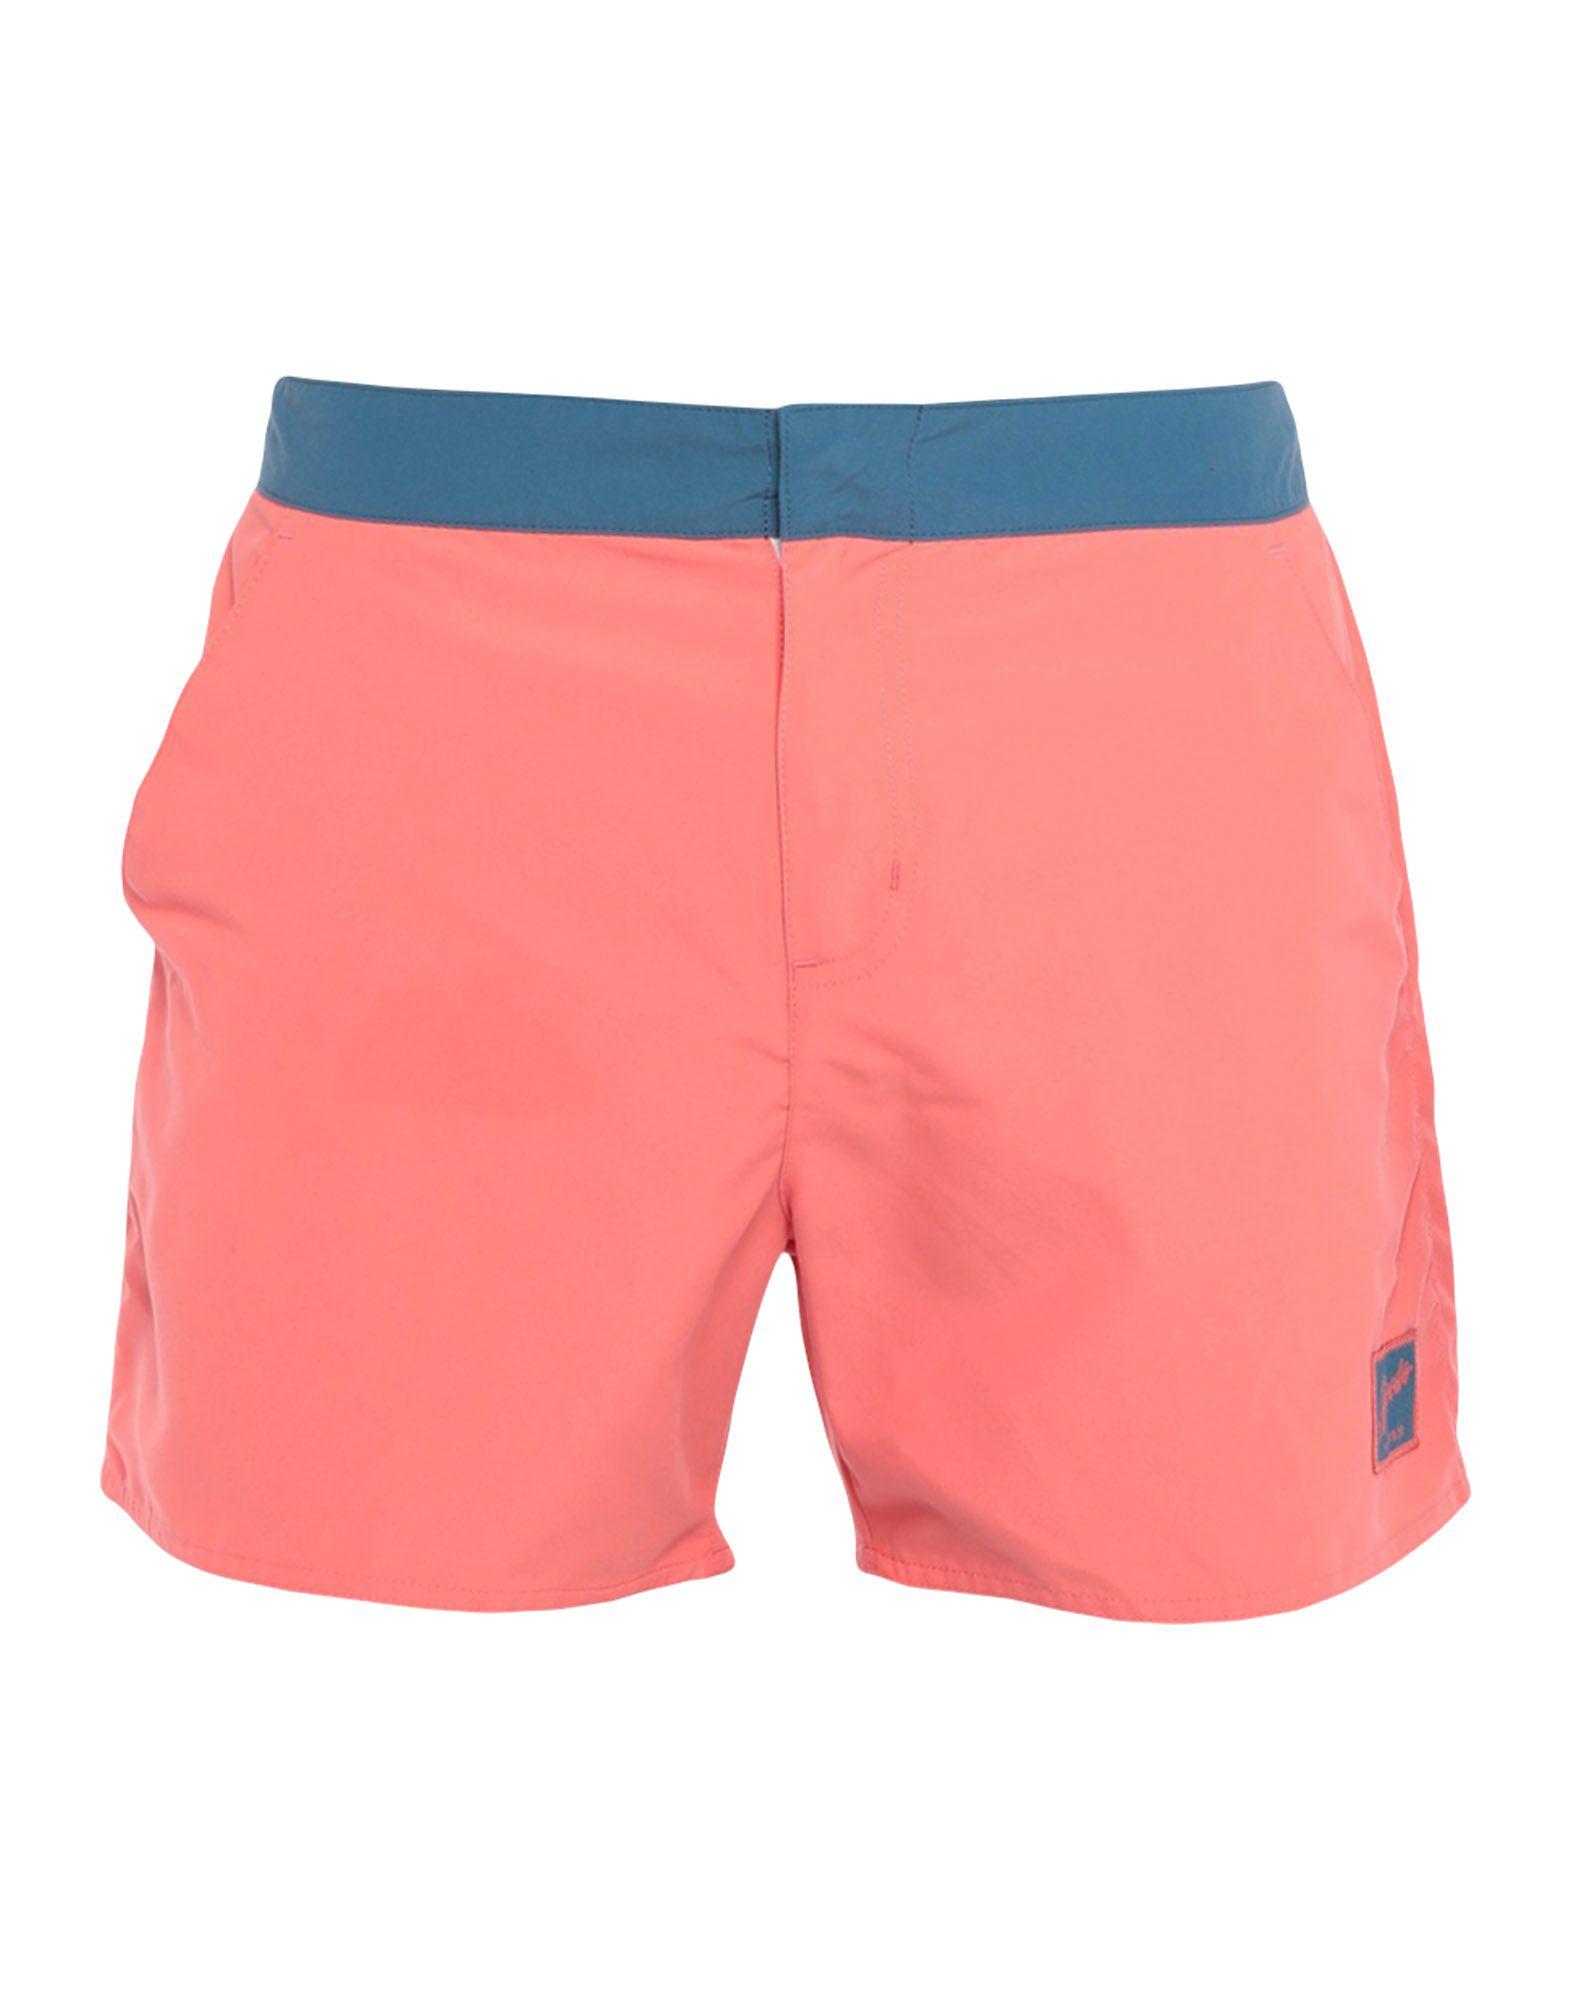 Speedo Synthetic Swim Trunks in Coral (Pink) for Men - Save 43% - Lyst